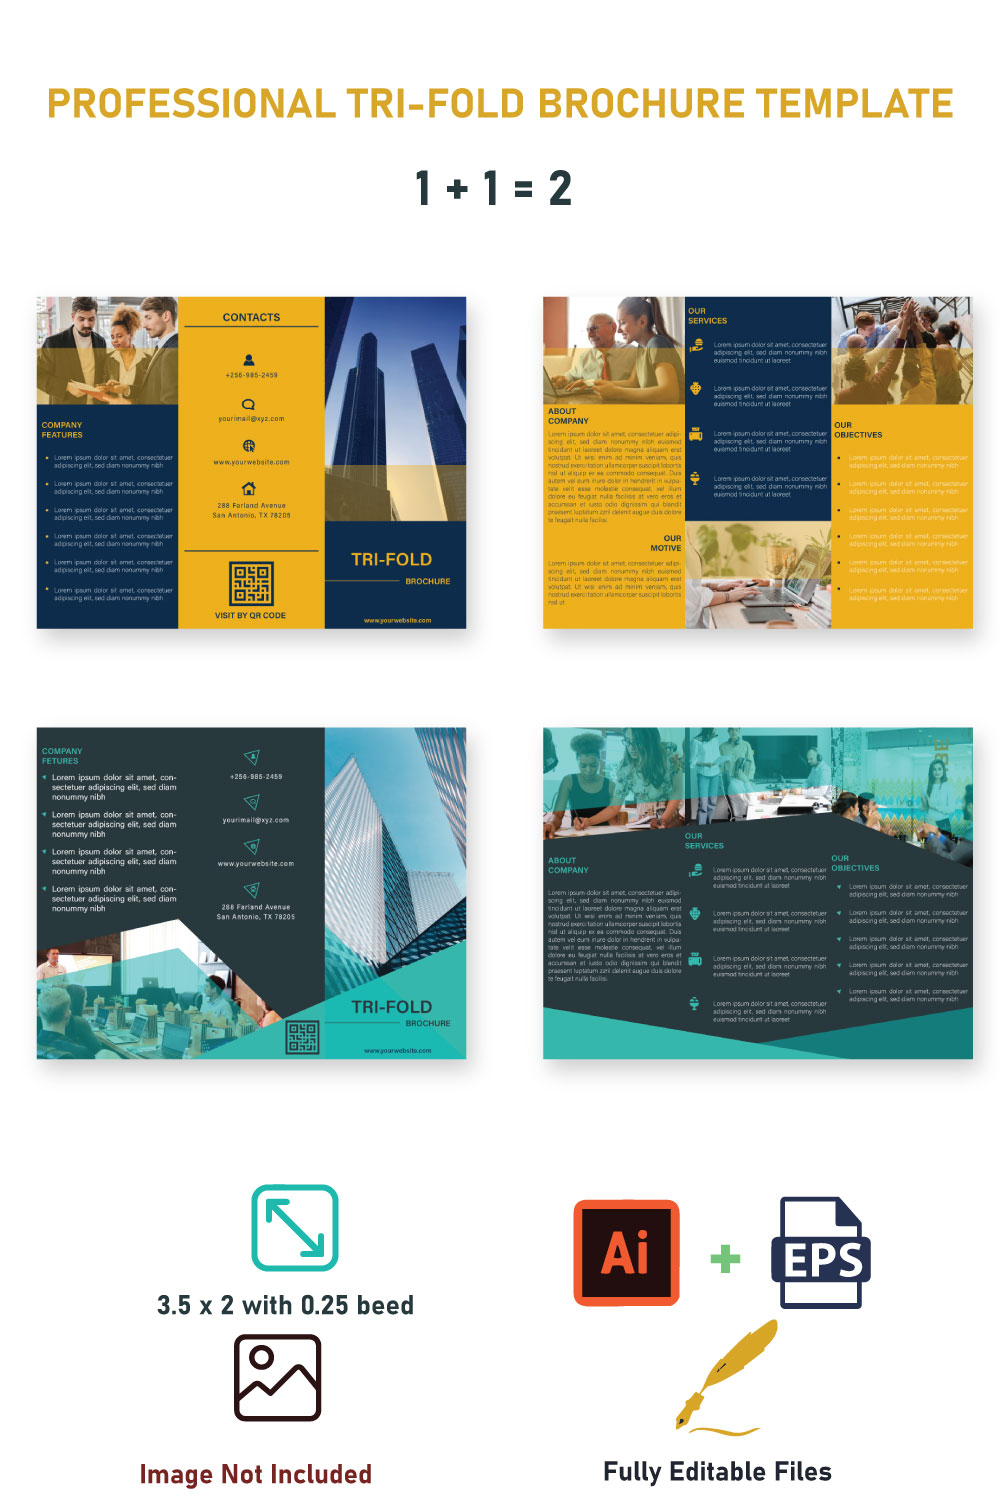 A selection of images of unique brochure templates